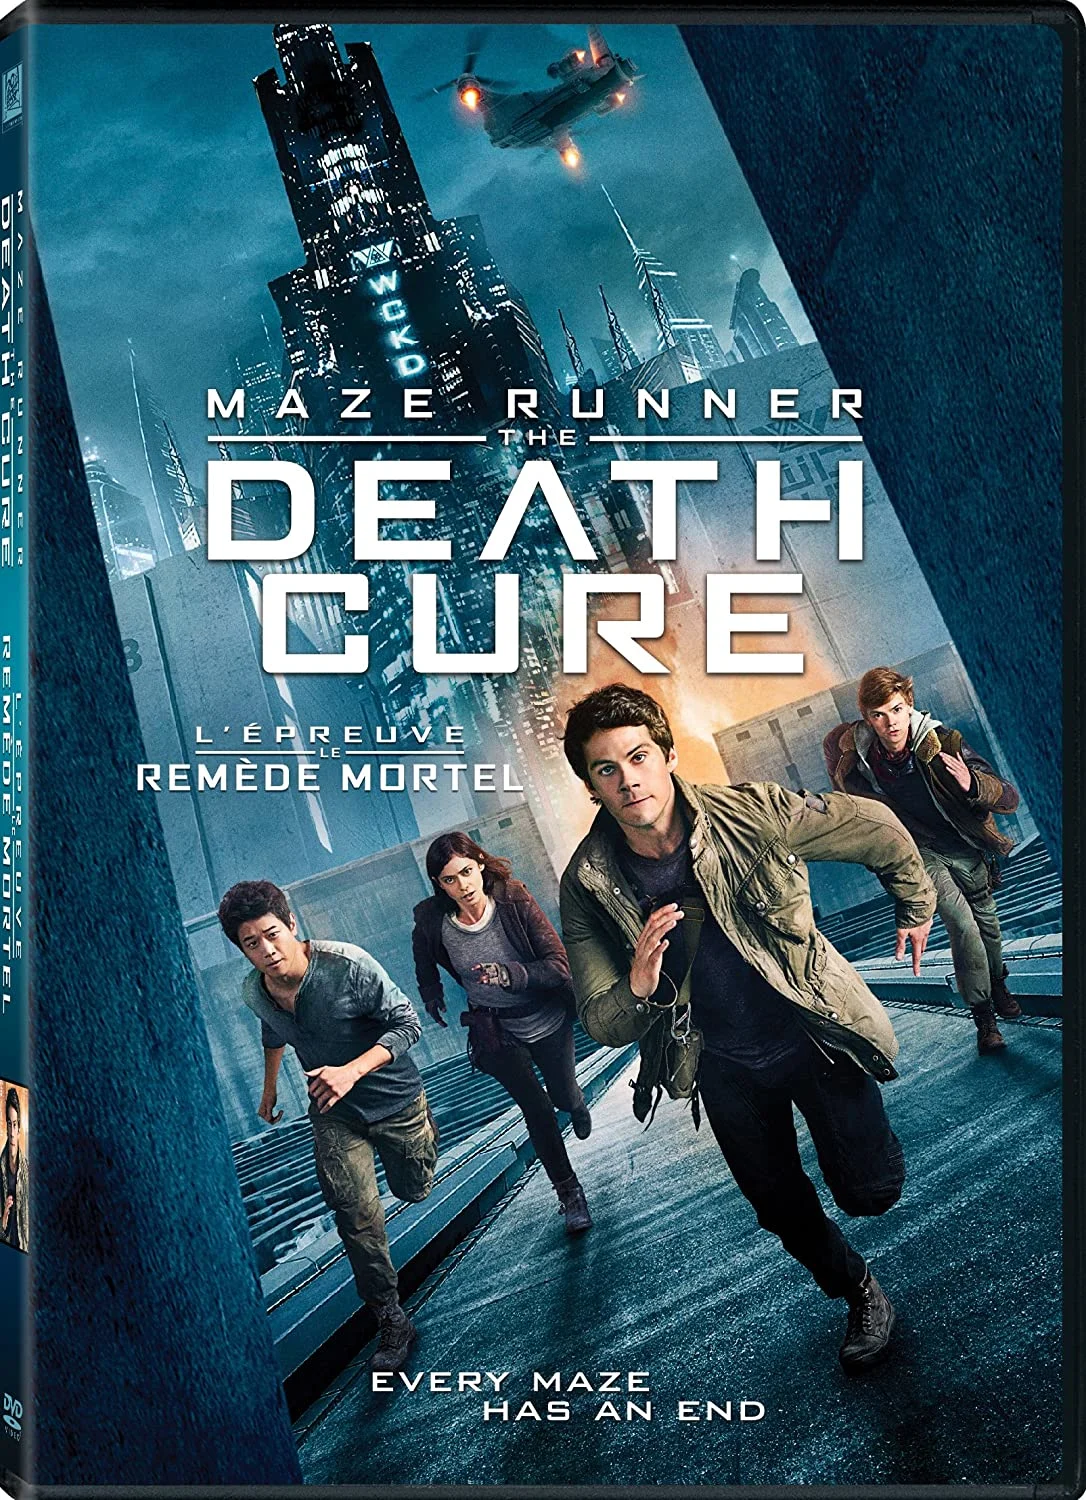 Maze Runner: The Death Cure (DVD) on MovieShack